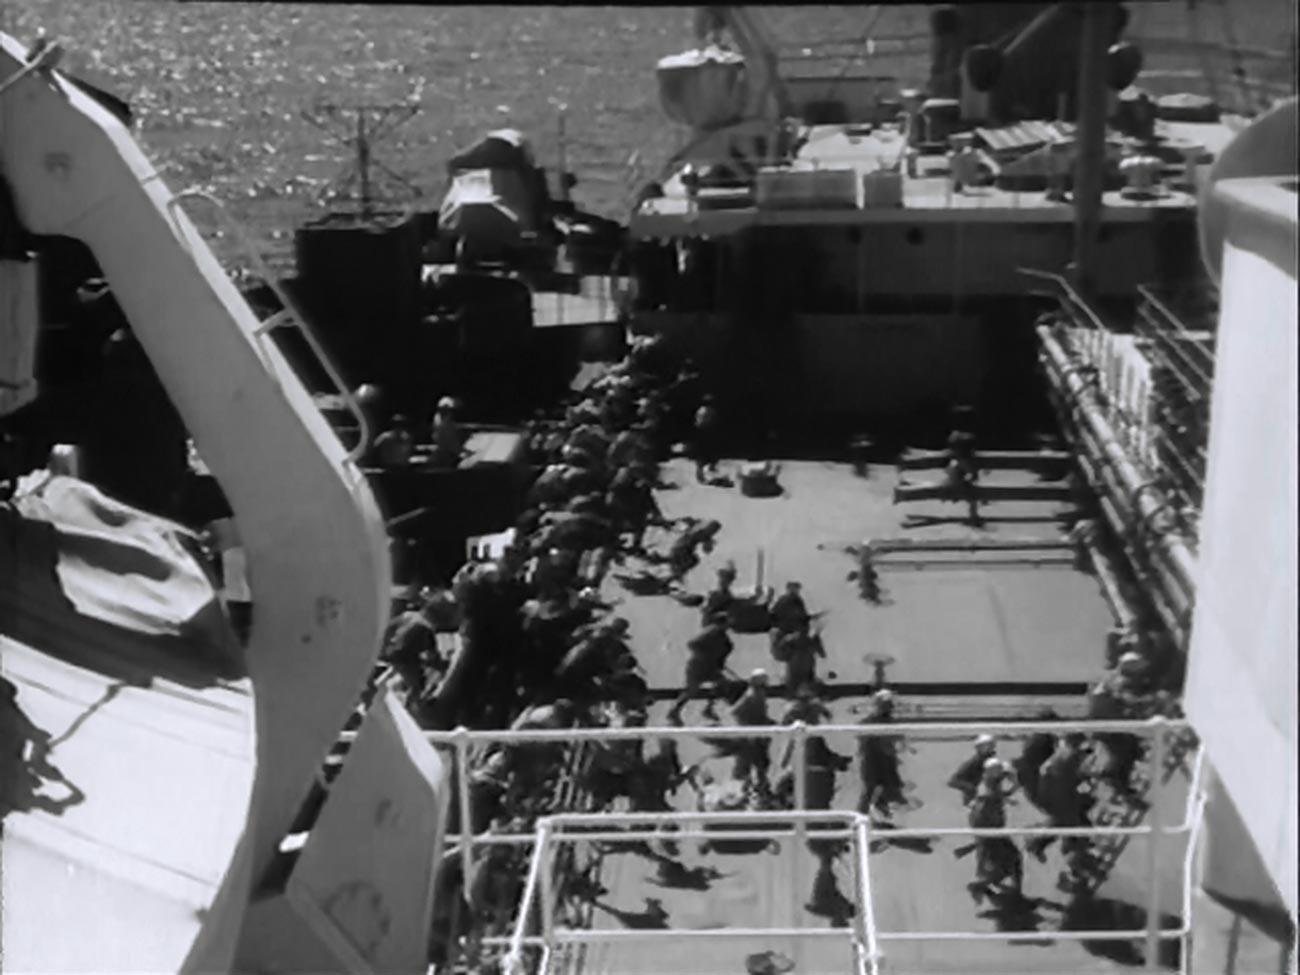 A still from the Soviet movie 'E.A. — Extraordinary Accident', based on real events of the capture of the Soviet tanker 'Tuapse'.